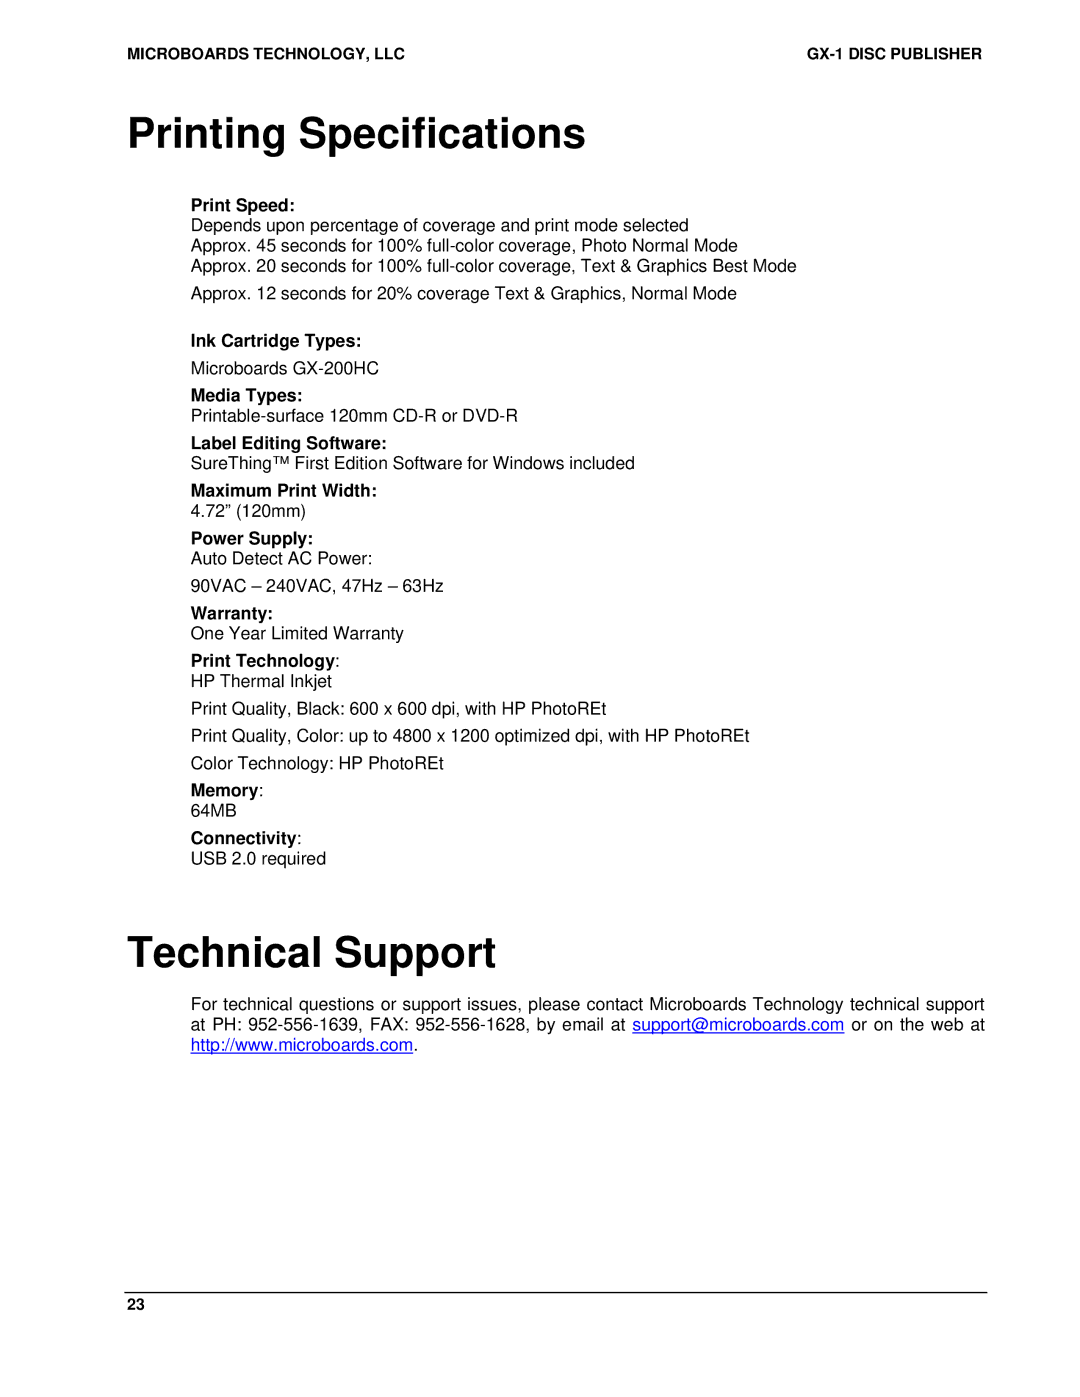 MicroBoards Technology GX-1 user manual Printing Specifications, Technical Support 